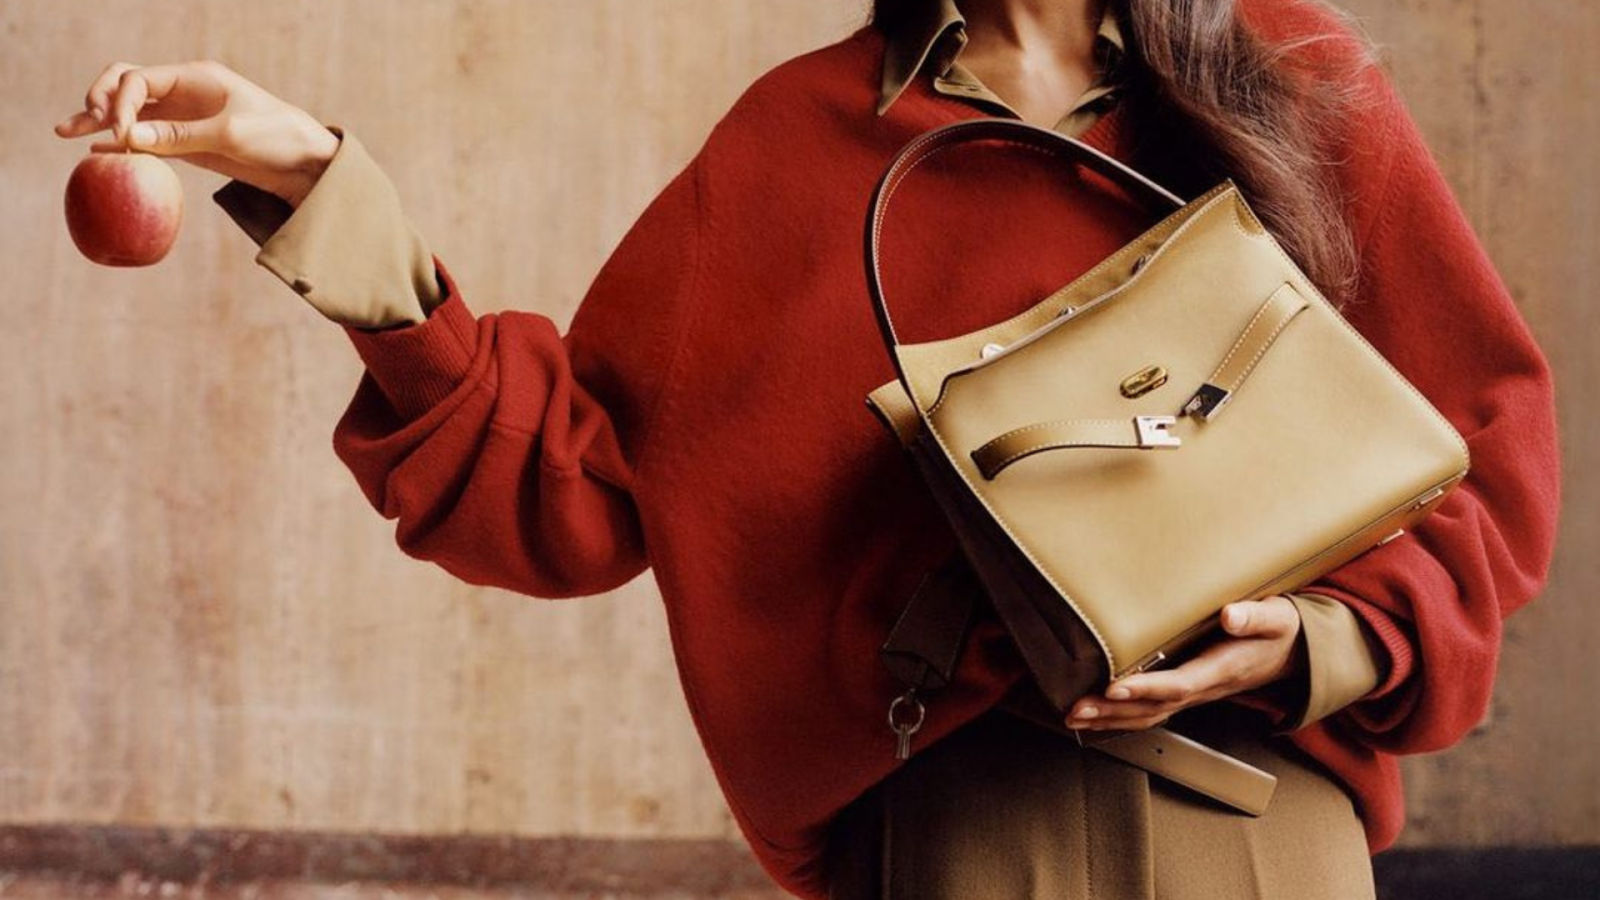 Same, same but different - Alternatives to the Louis Vuitton